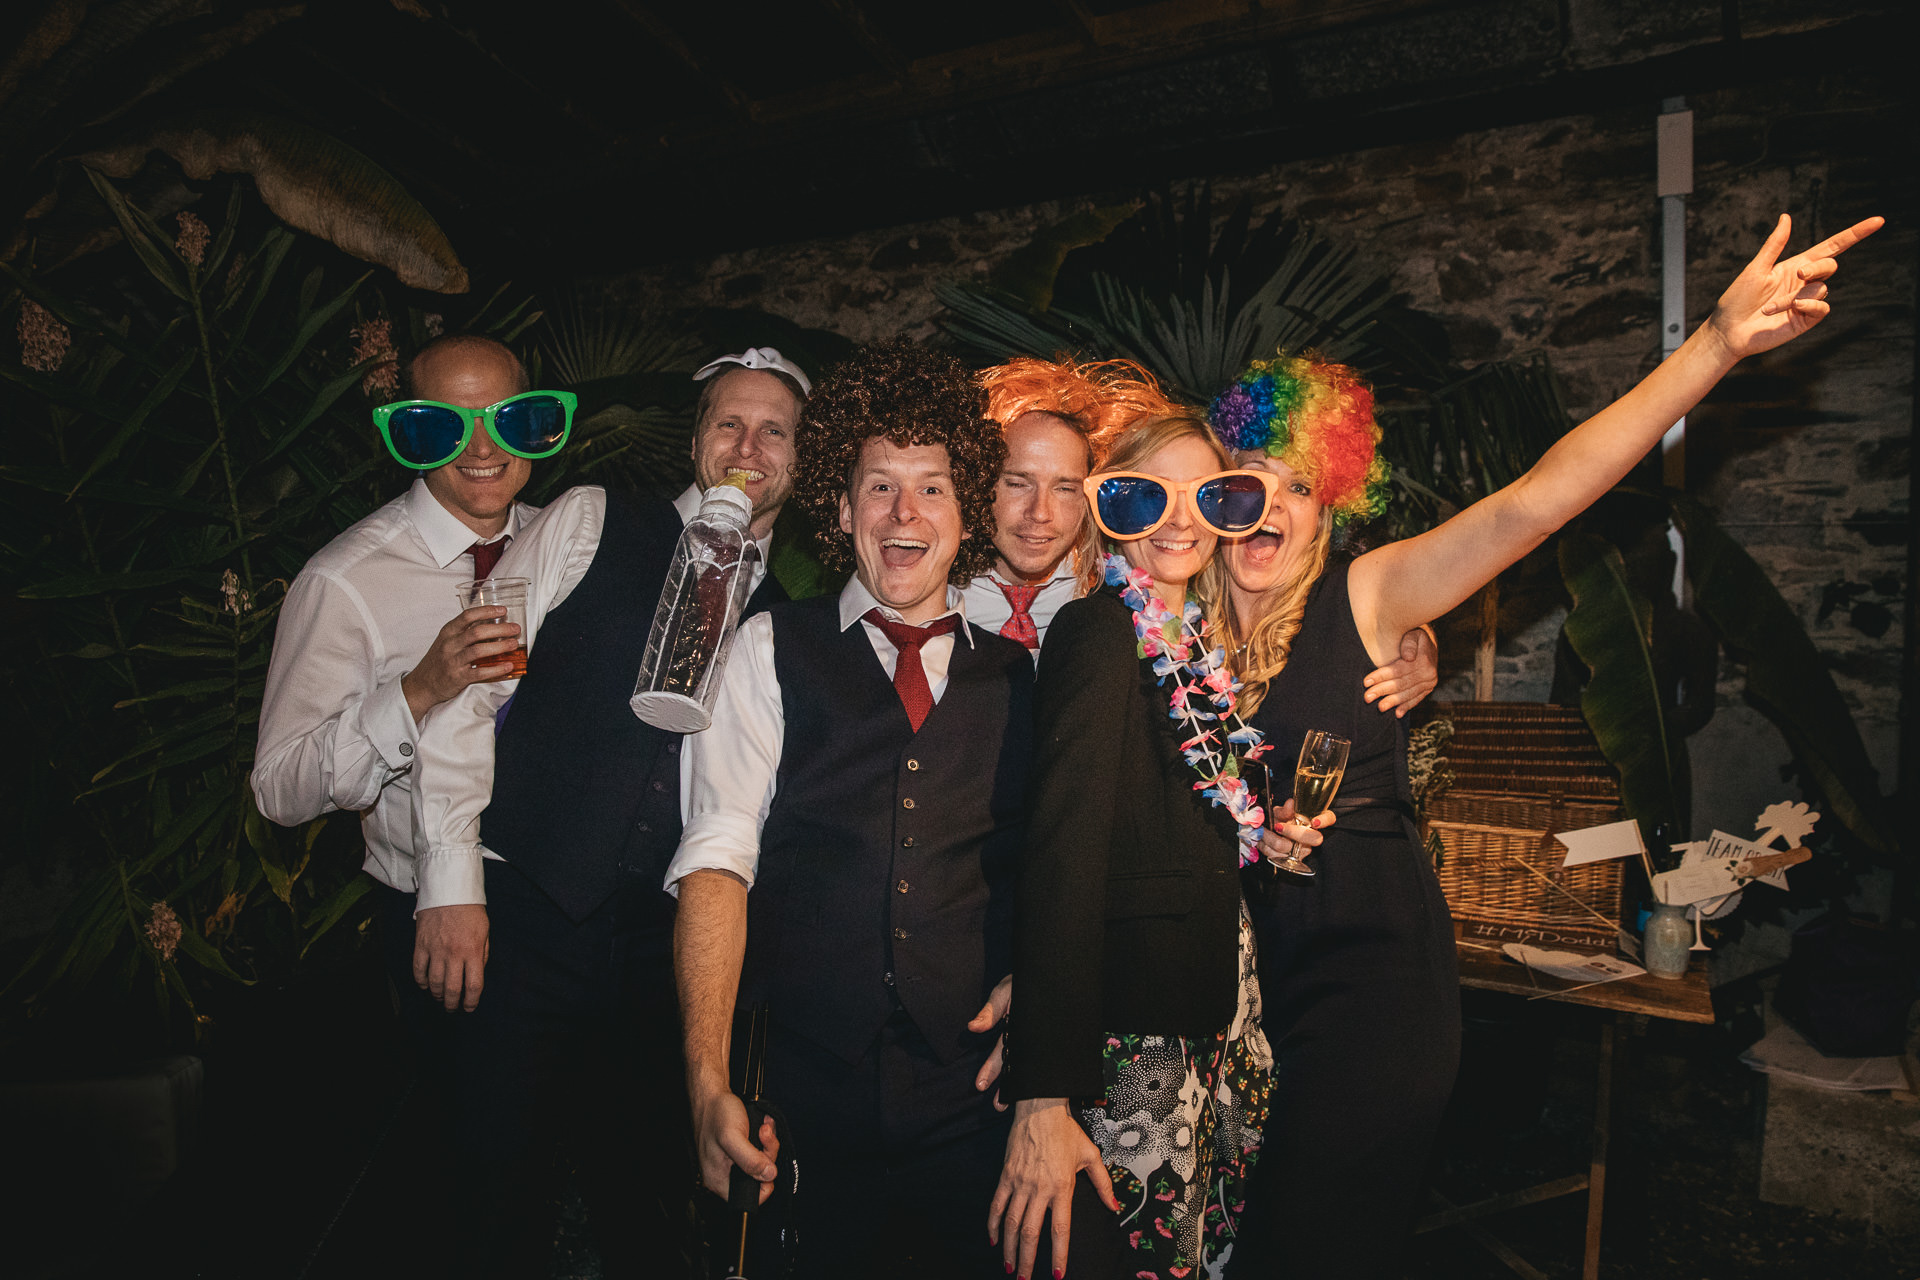 Wedding guests dressed in silly props